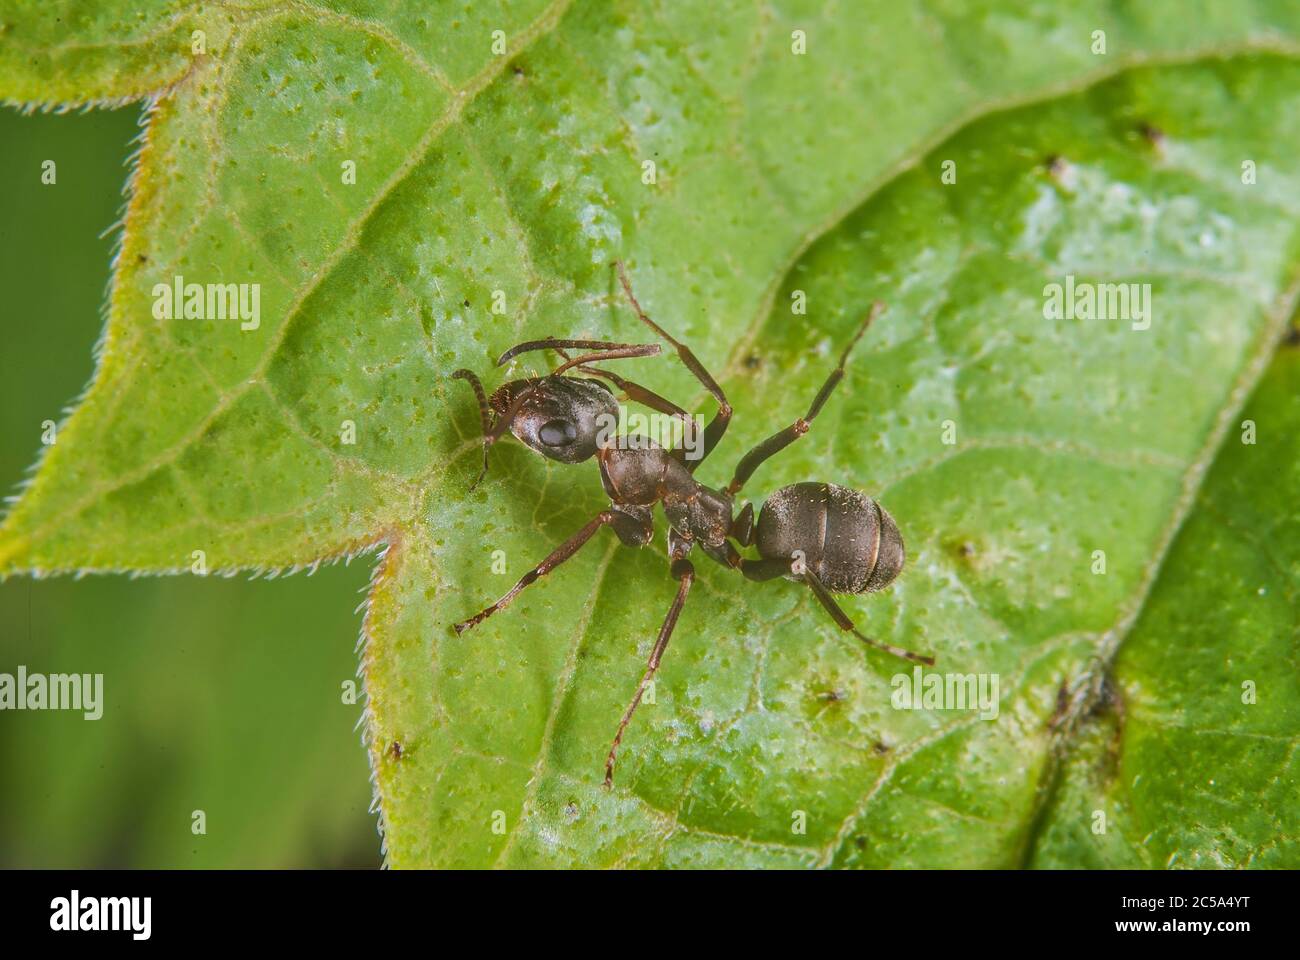 The Red wood ant (Formica rufa) Stock Photo